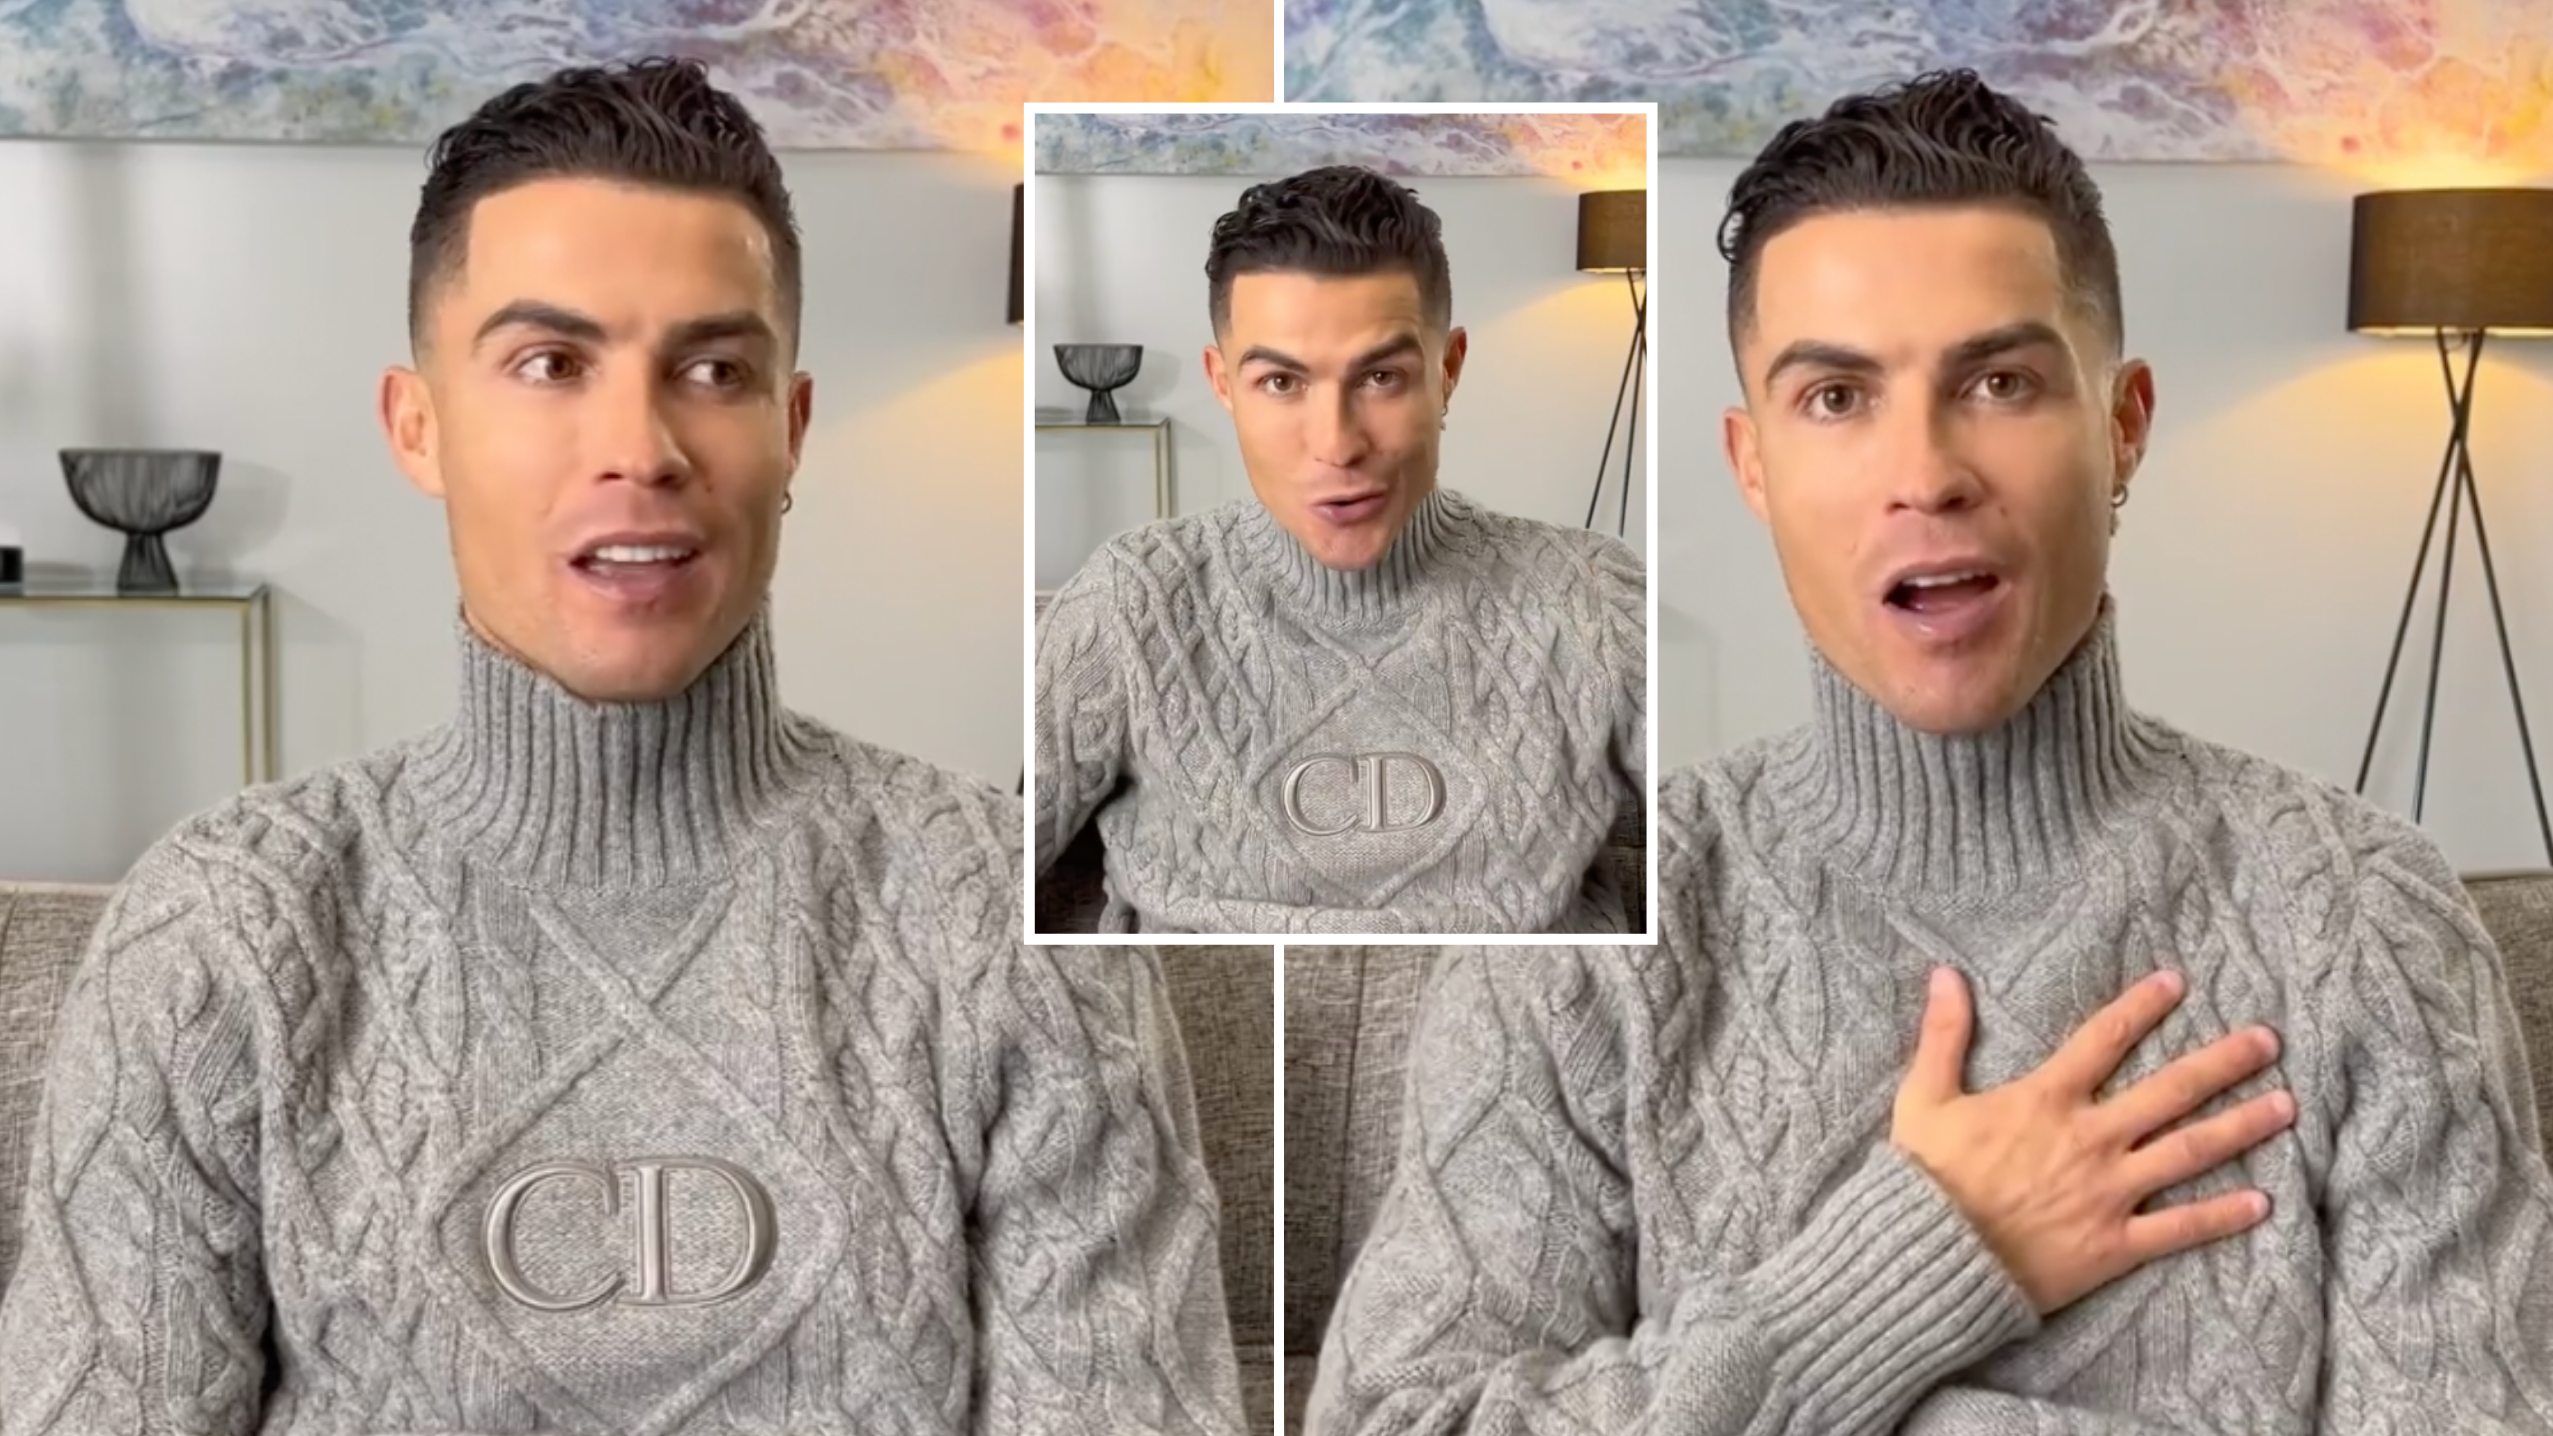 Cristiano Ronaldo becomes the first person to reach 400 million followers  on Instagram